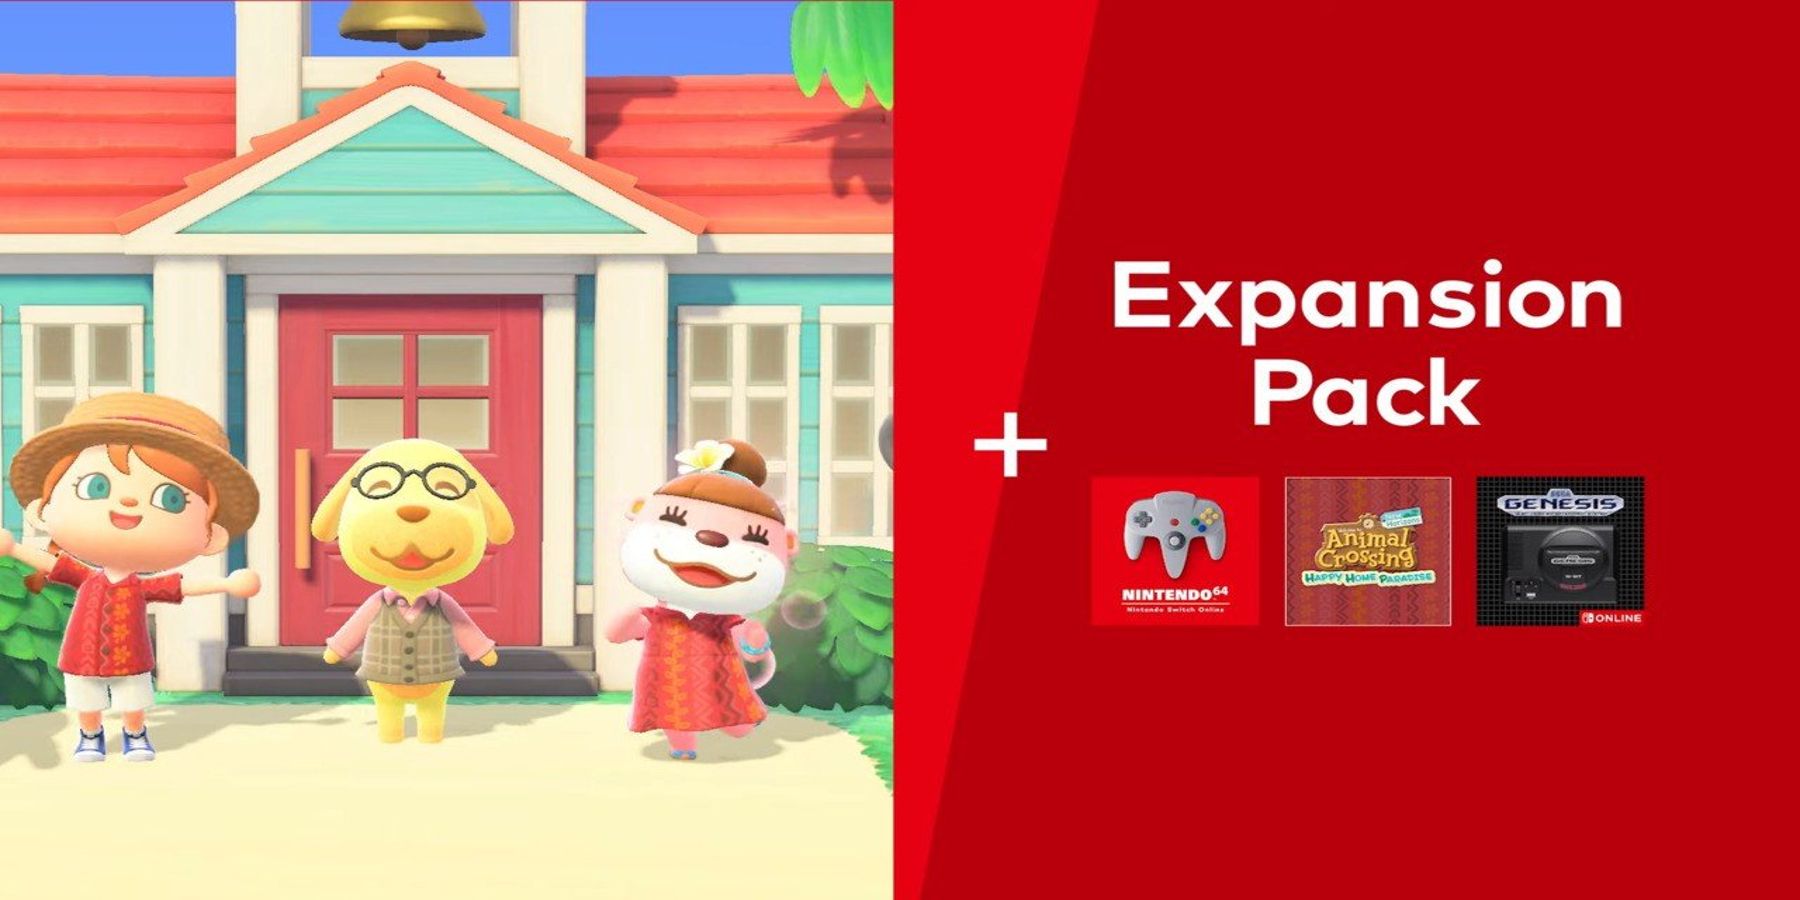 Is Switch Online Expansion Pack Worth It For Animal Crossing Fans?